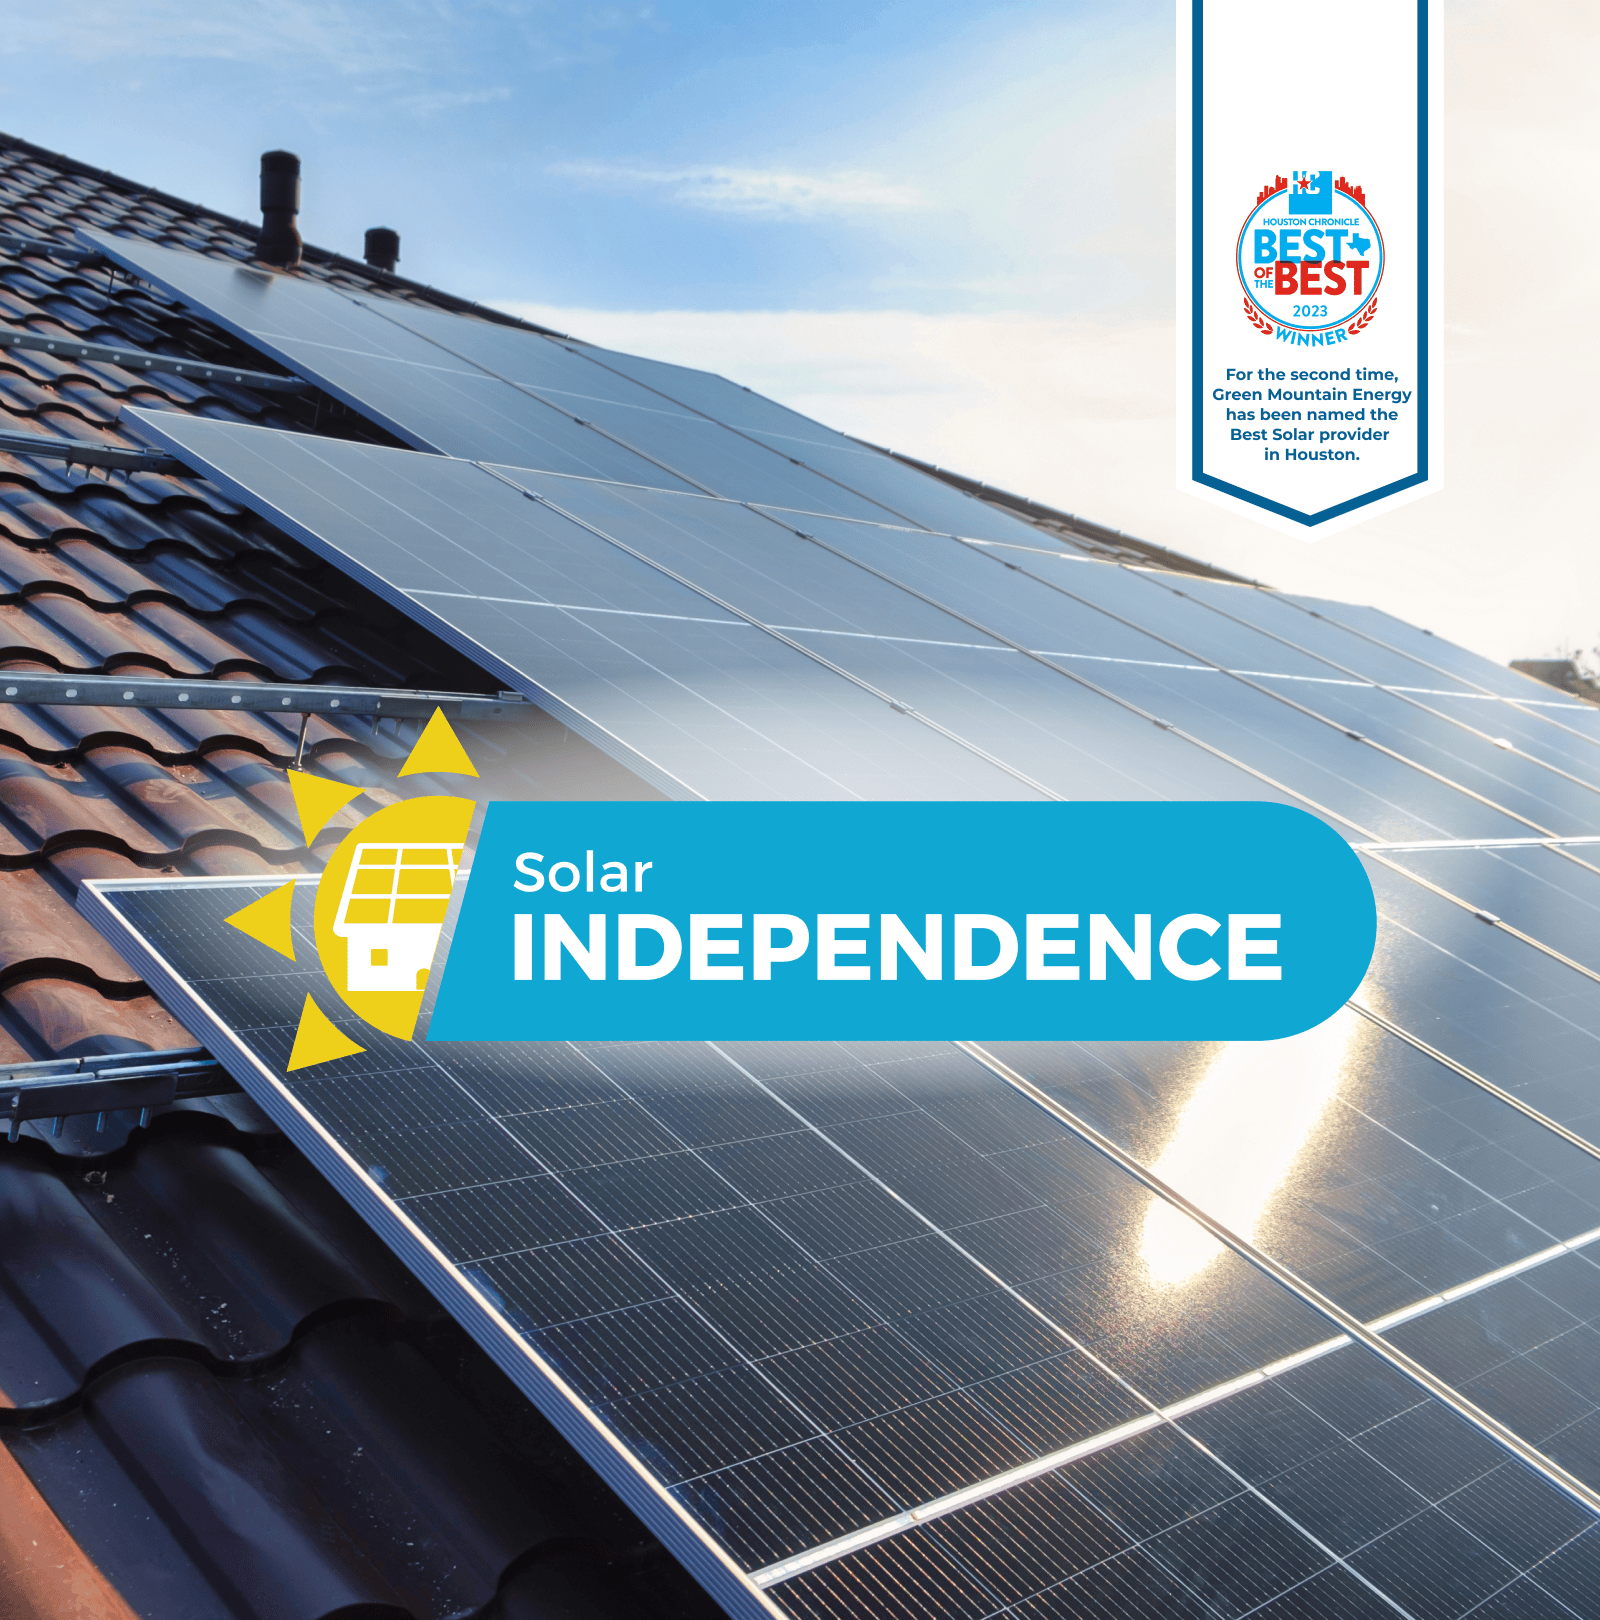 Solar Independence
